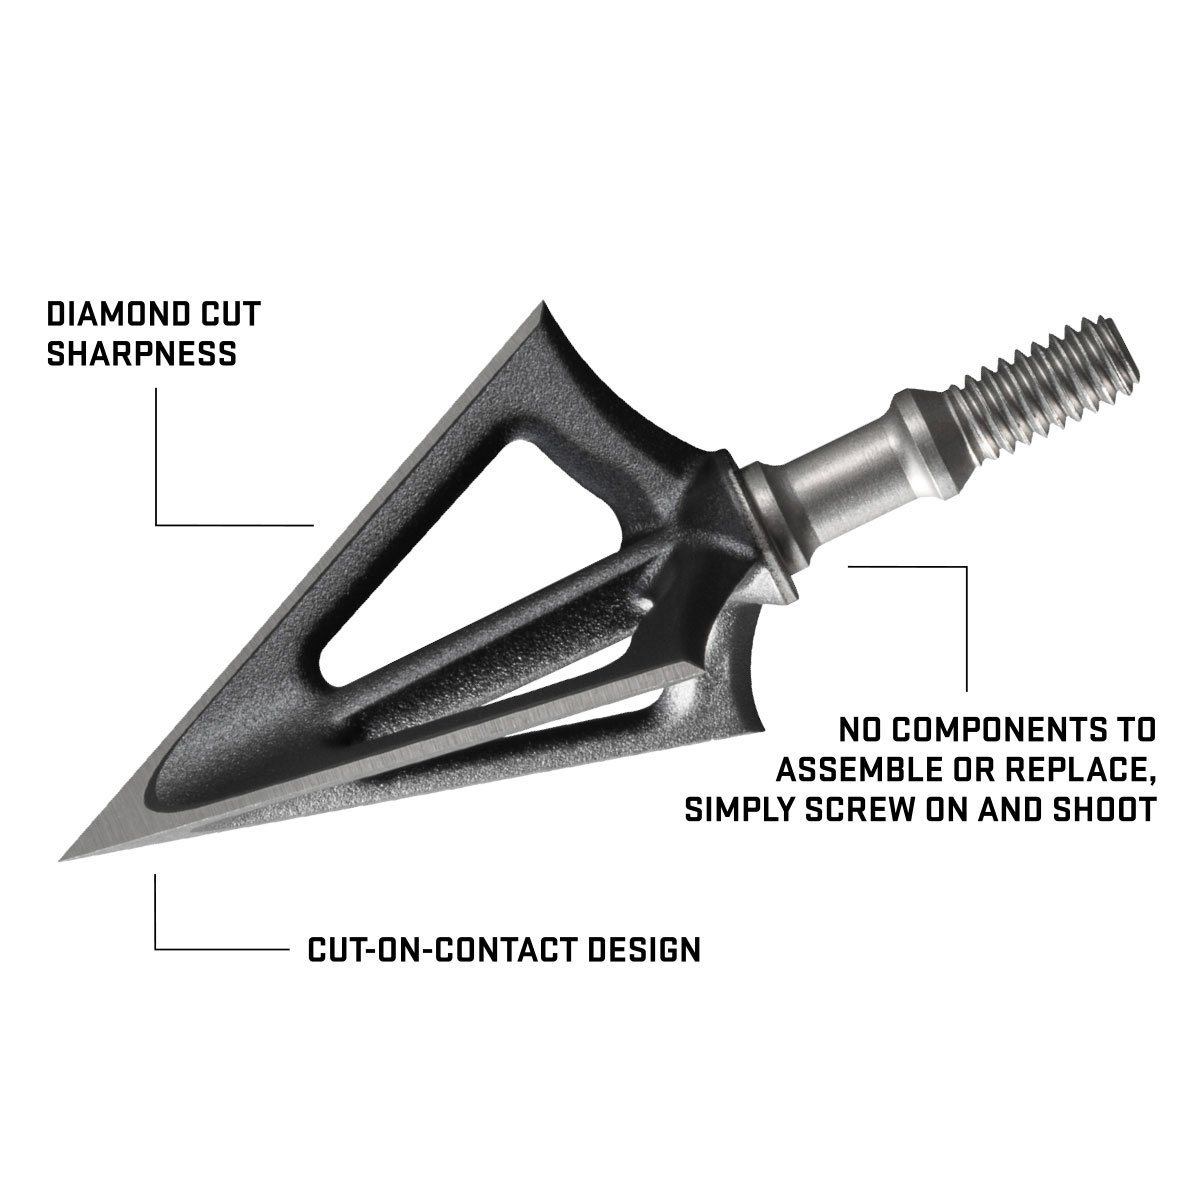 3 Pack High Performance Broadhead. G5 Outdoors Montec 100% Stainless Steel Fixed Broadheads Made in The USA Simple to Use